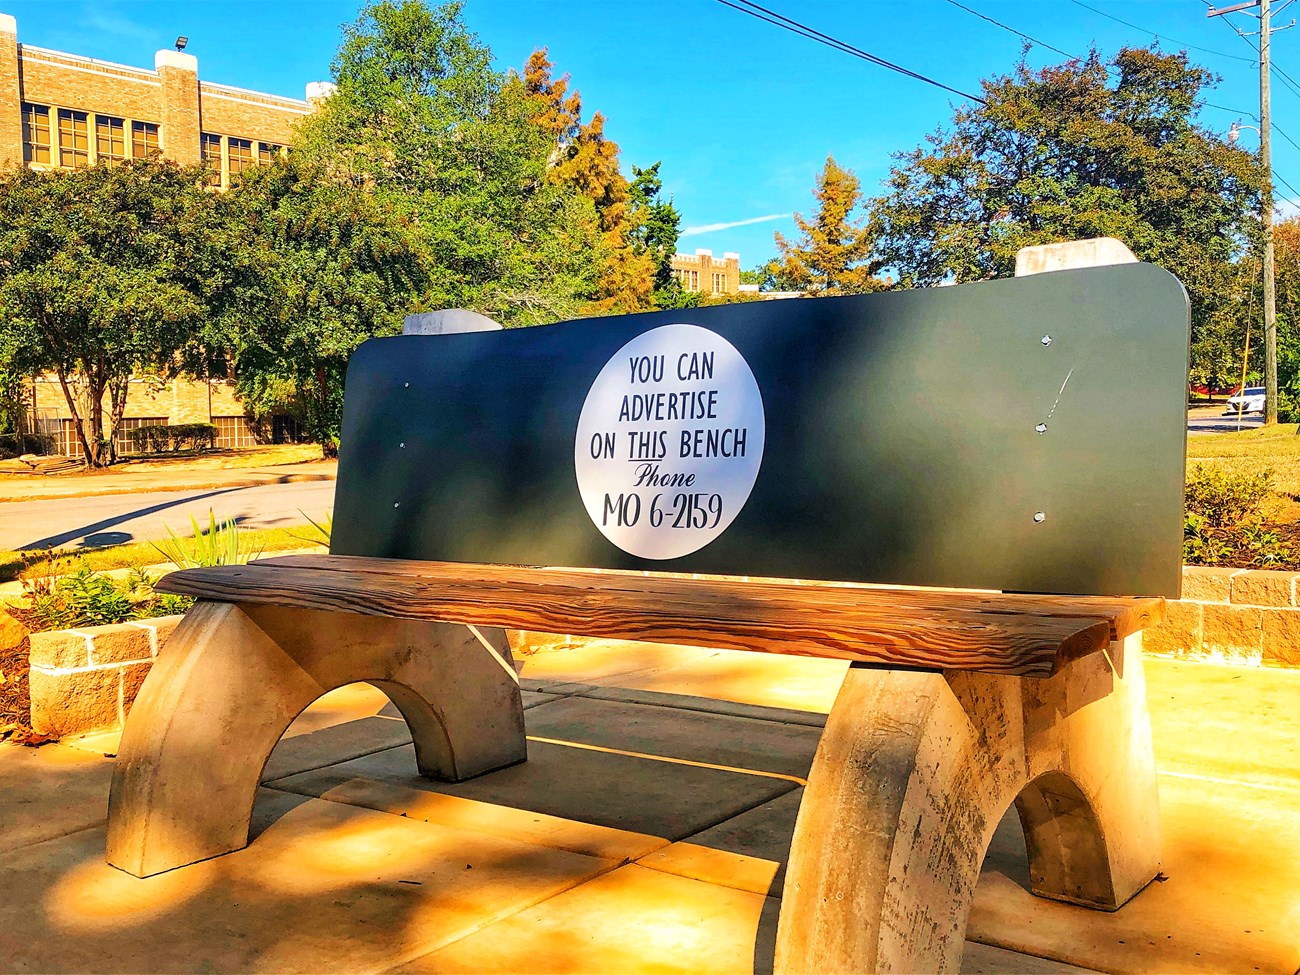 A commemorative Bus Bench from the story of the Little Rock desegregation & Elizabeth Eckford at the corner of Park and 16th Streets